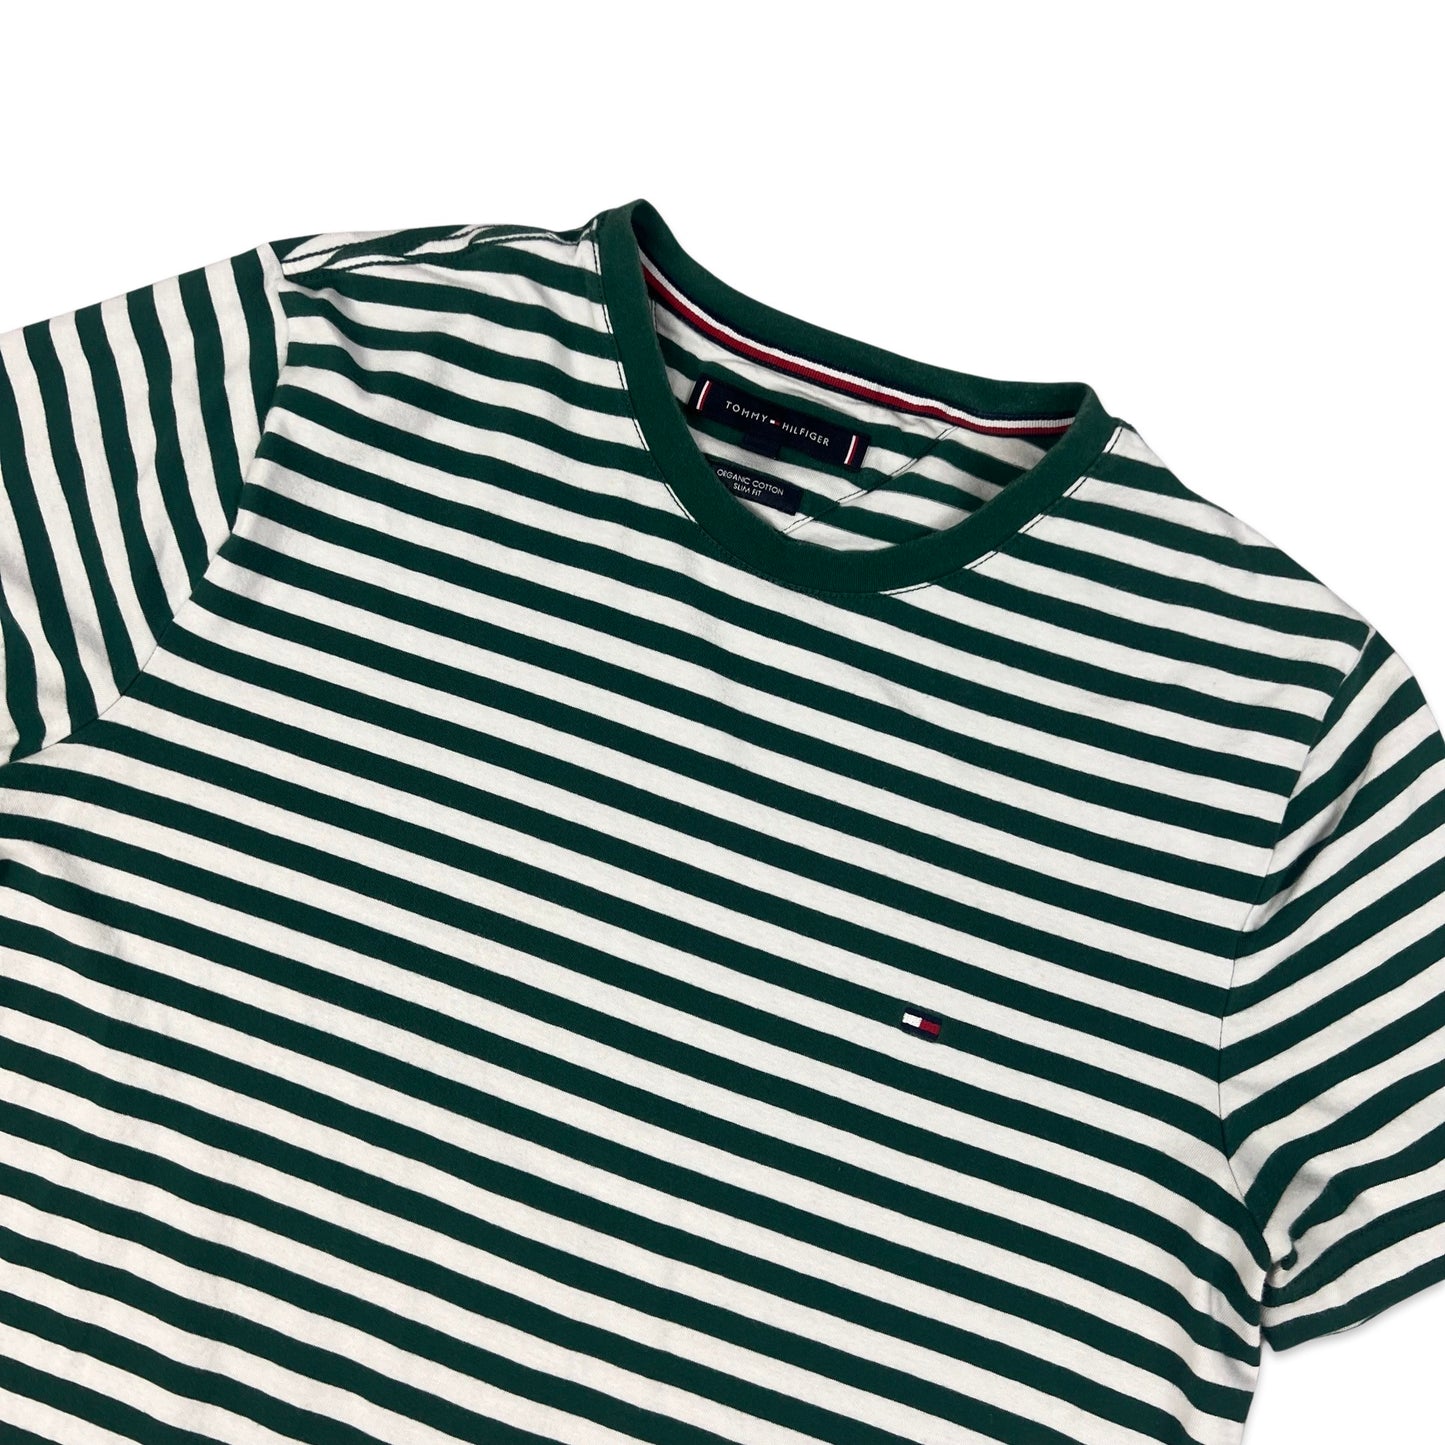 Tommy Hilfiger Green & White Striped Tee XS S